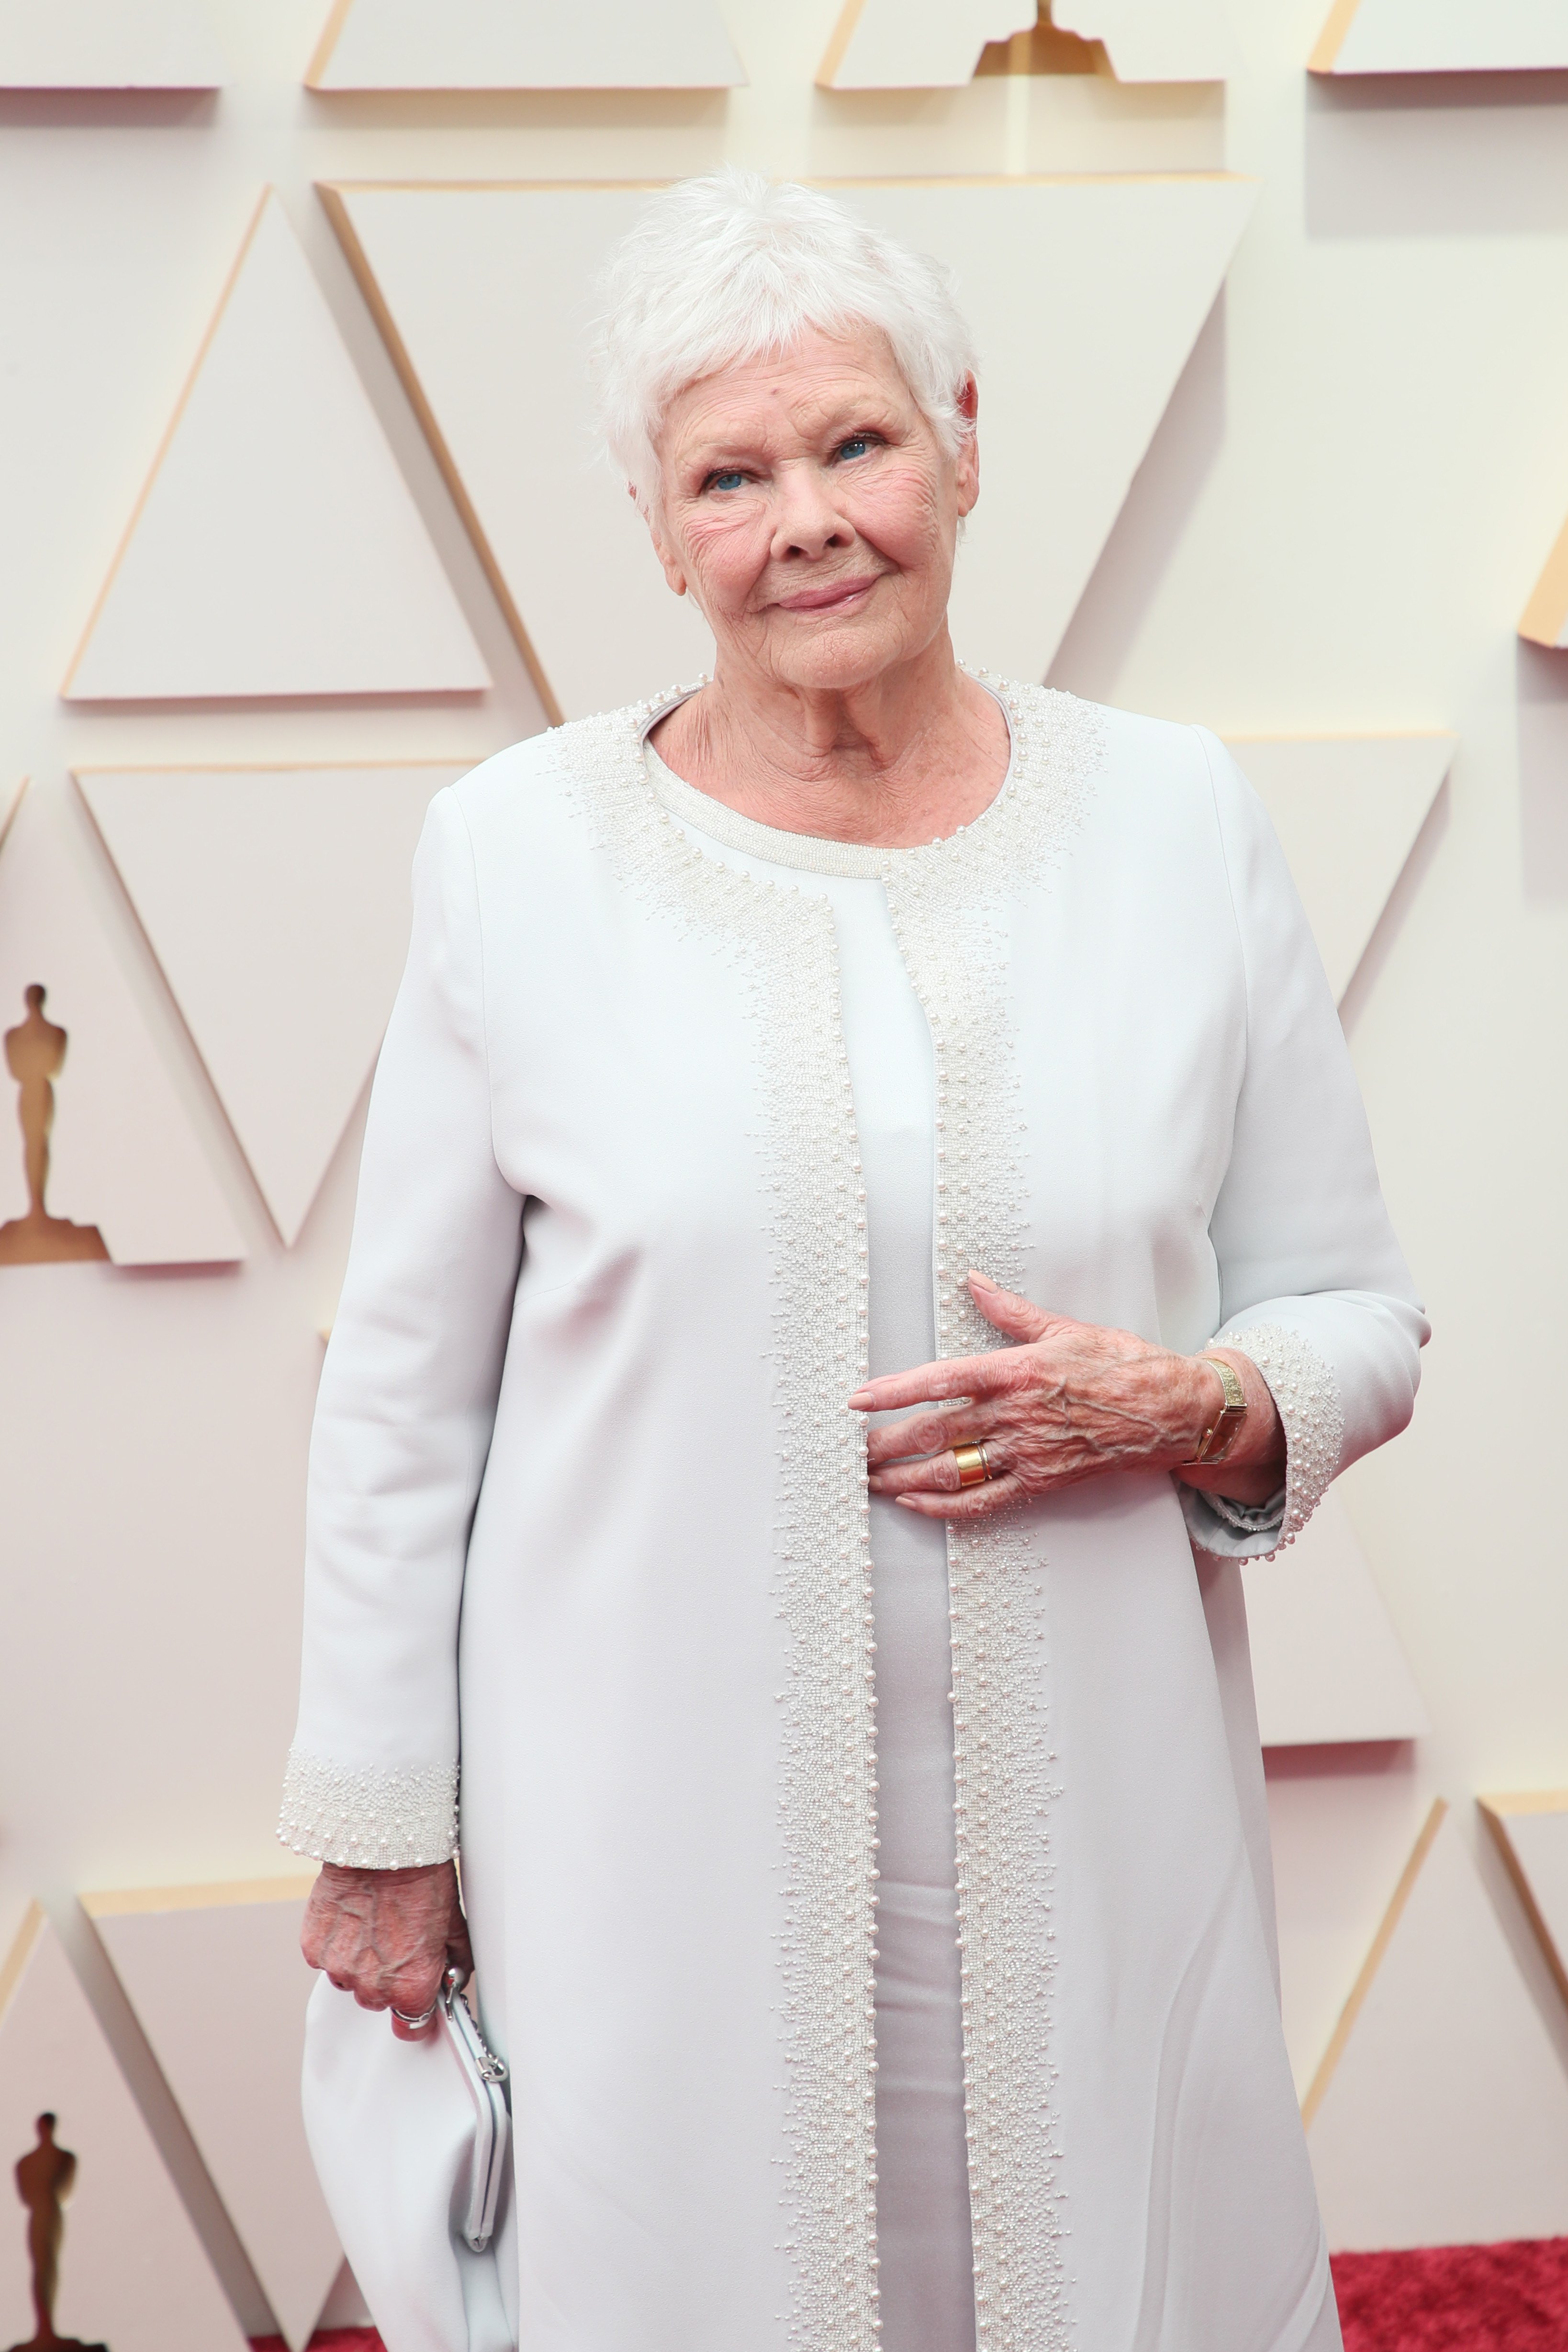 Judi Dench on March 27, 2022 in Hollywood, California. | Source: Getty Images